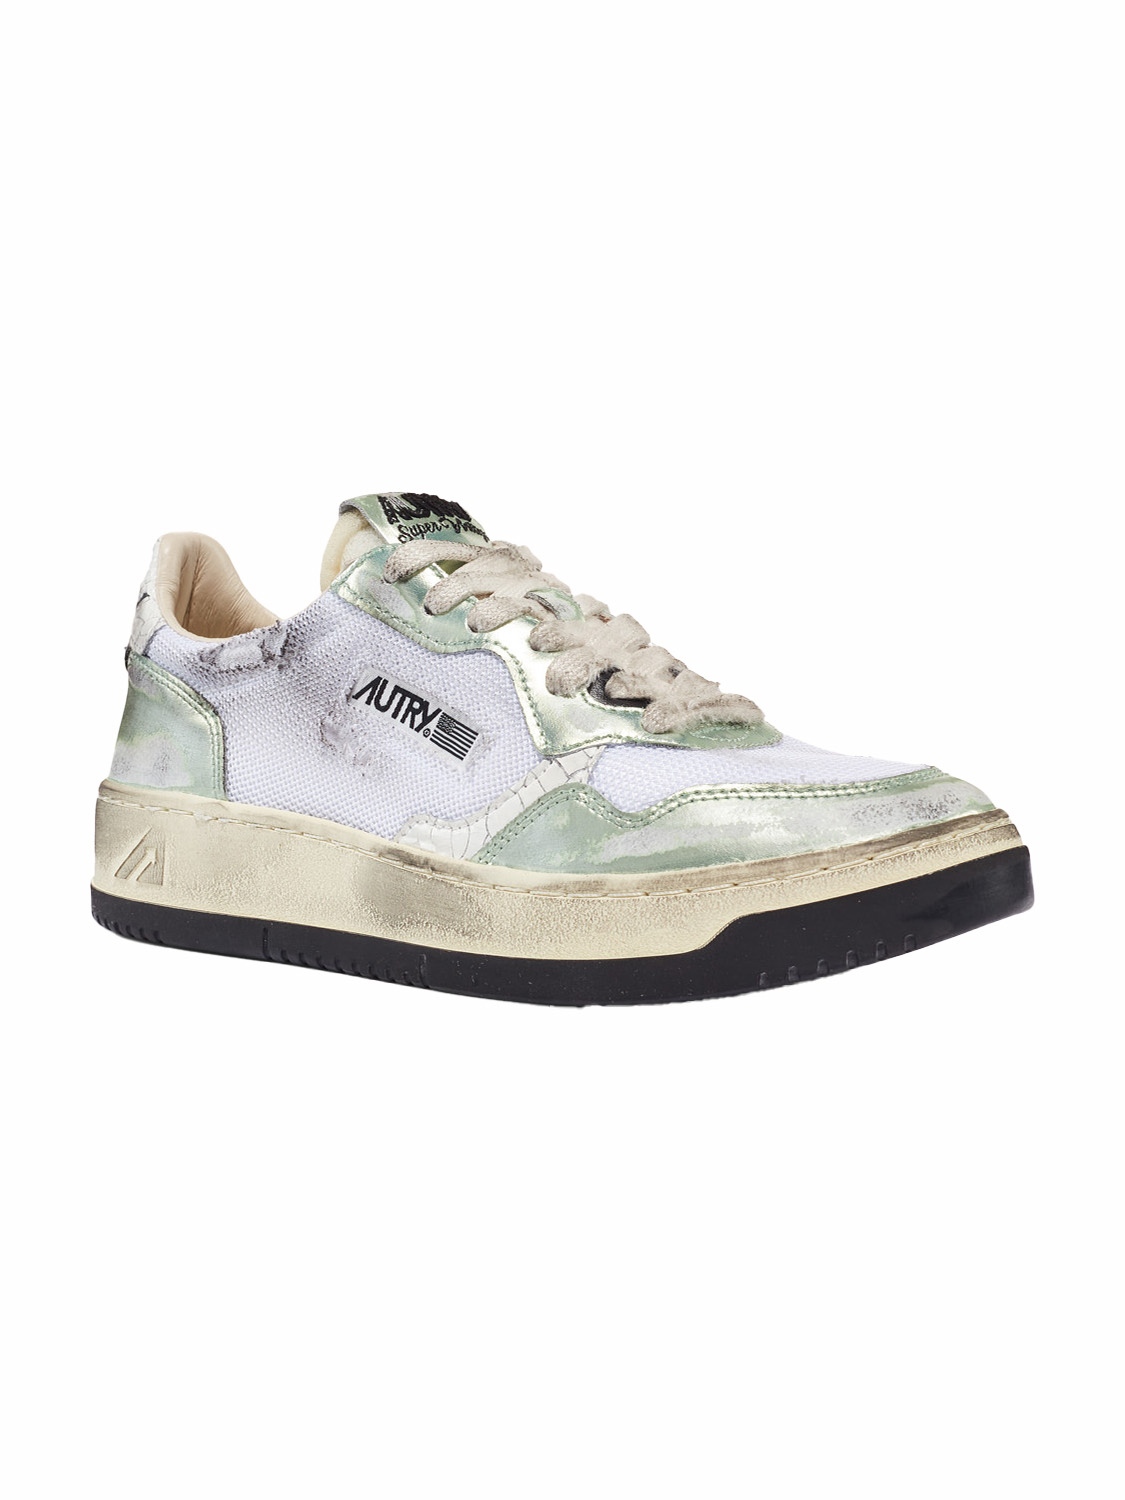 Sneaker super vintage medalist low made of suede and white leather 